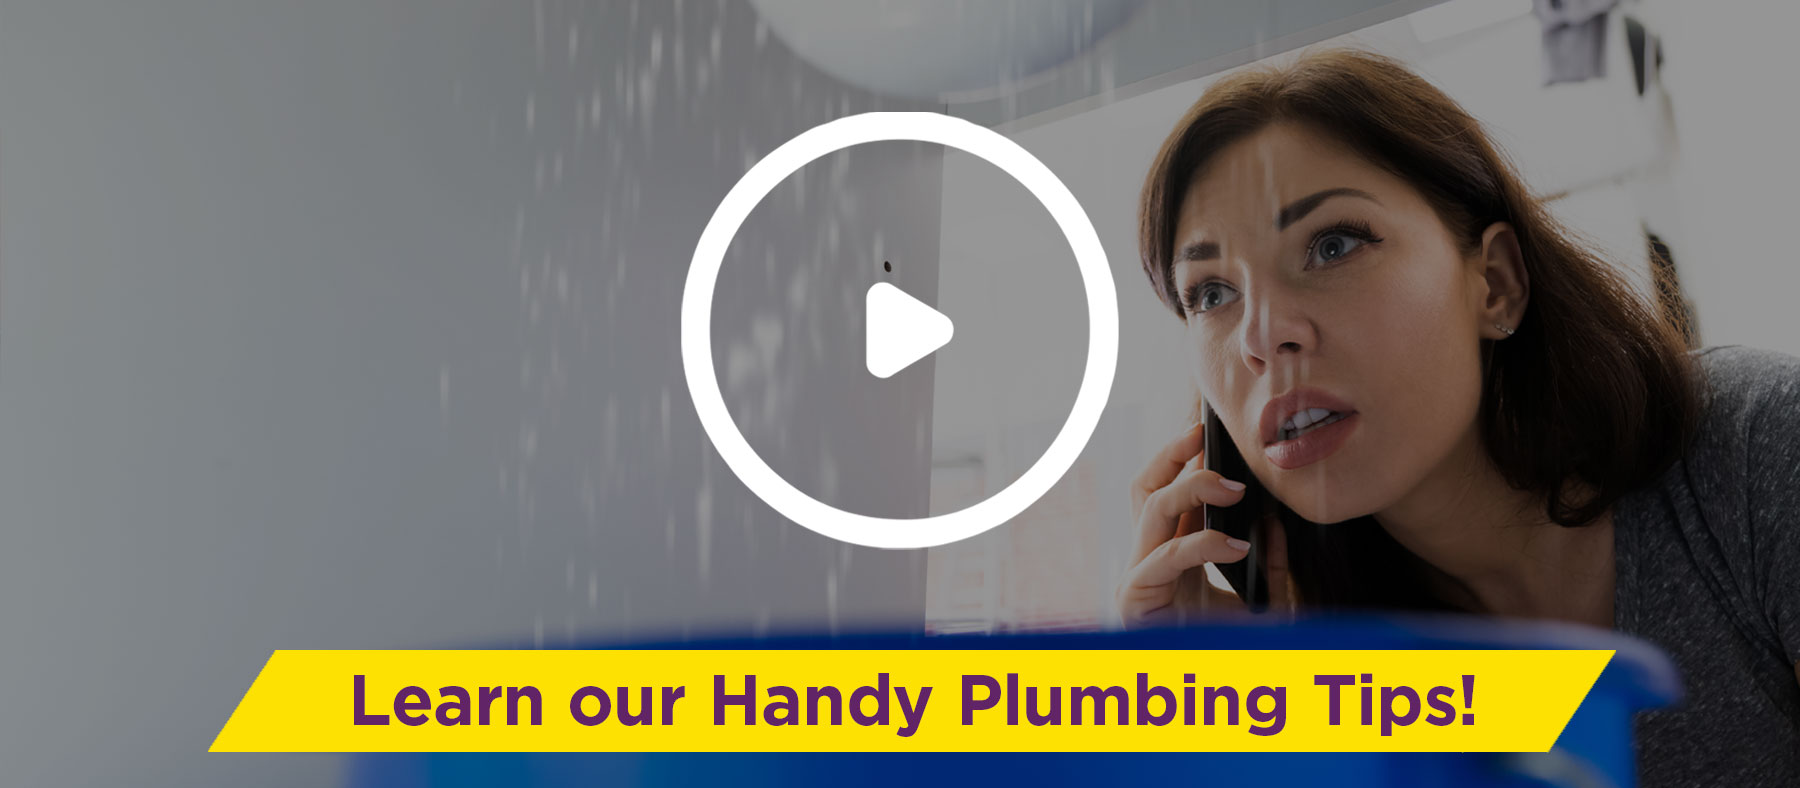 learn our handy plumbing tips